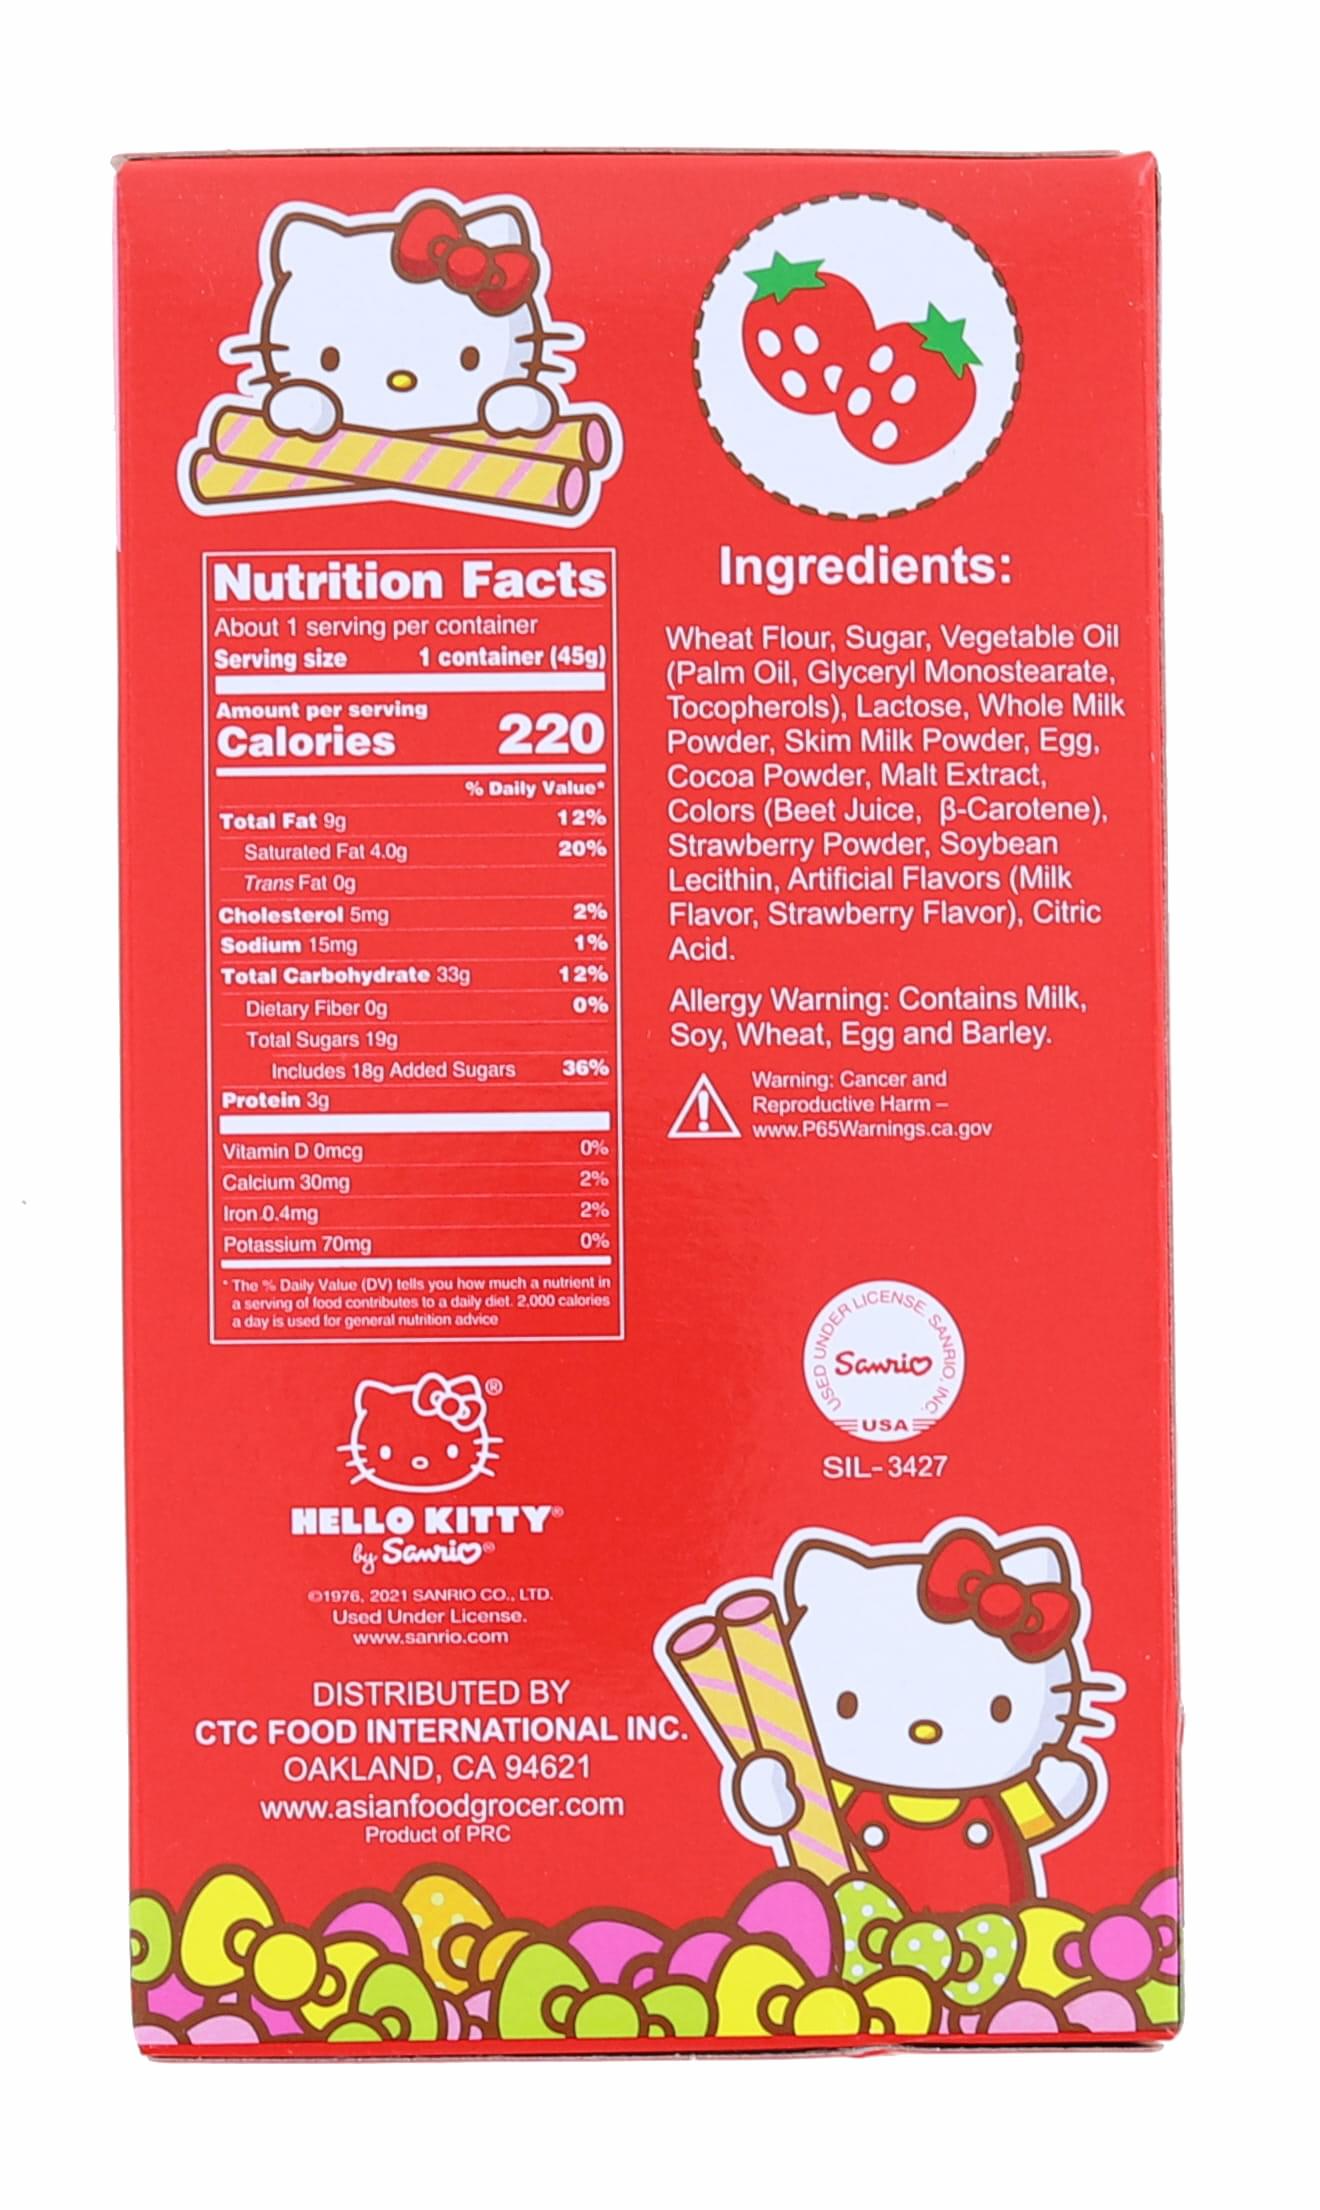 Hello Kitty Strawberry Wafer Cookies | 1.58 Ounce Pack